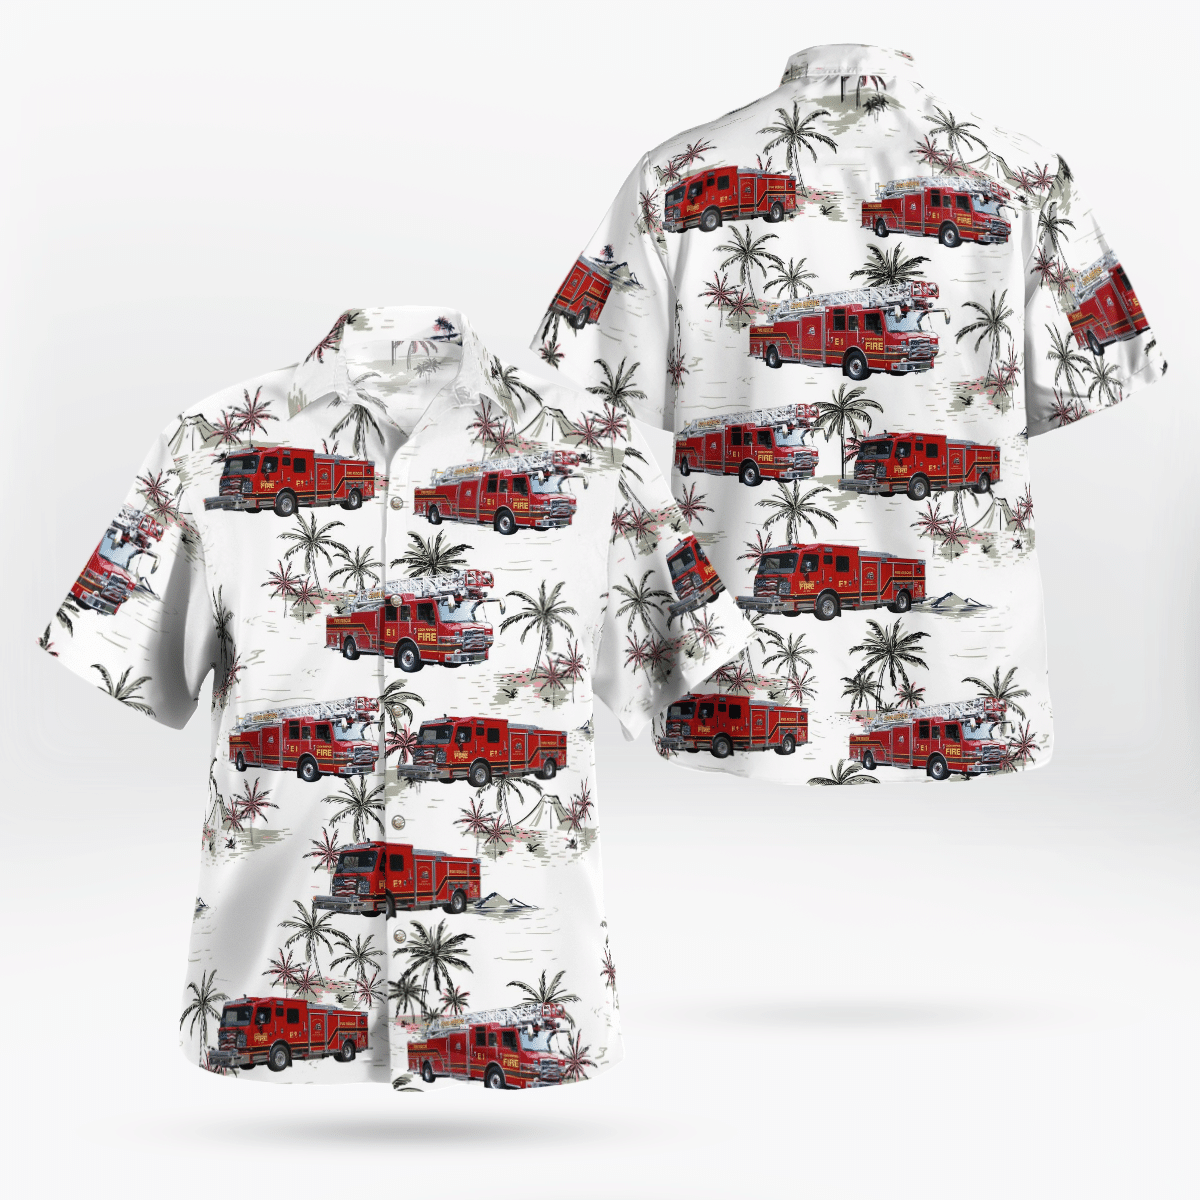 If you are in need of a new summertime look, pick up this Hawaiian shirt 91